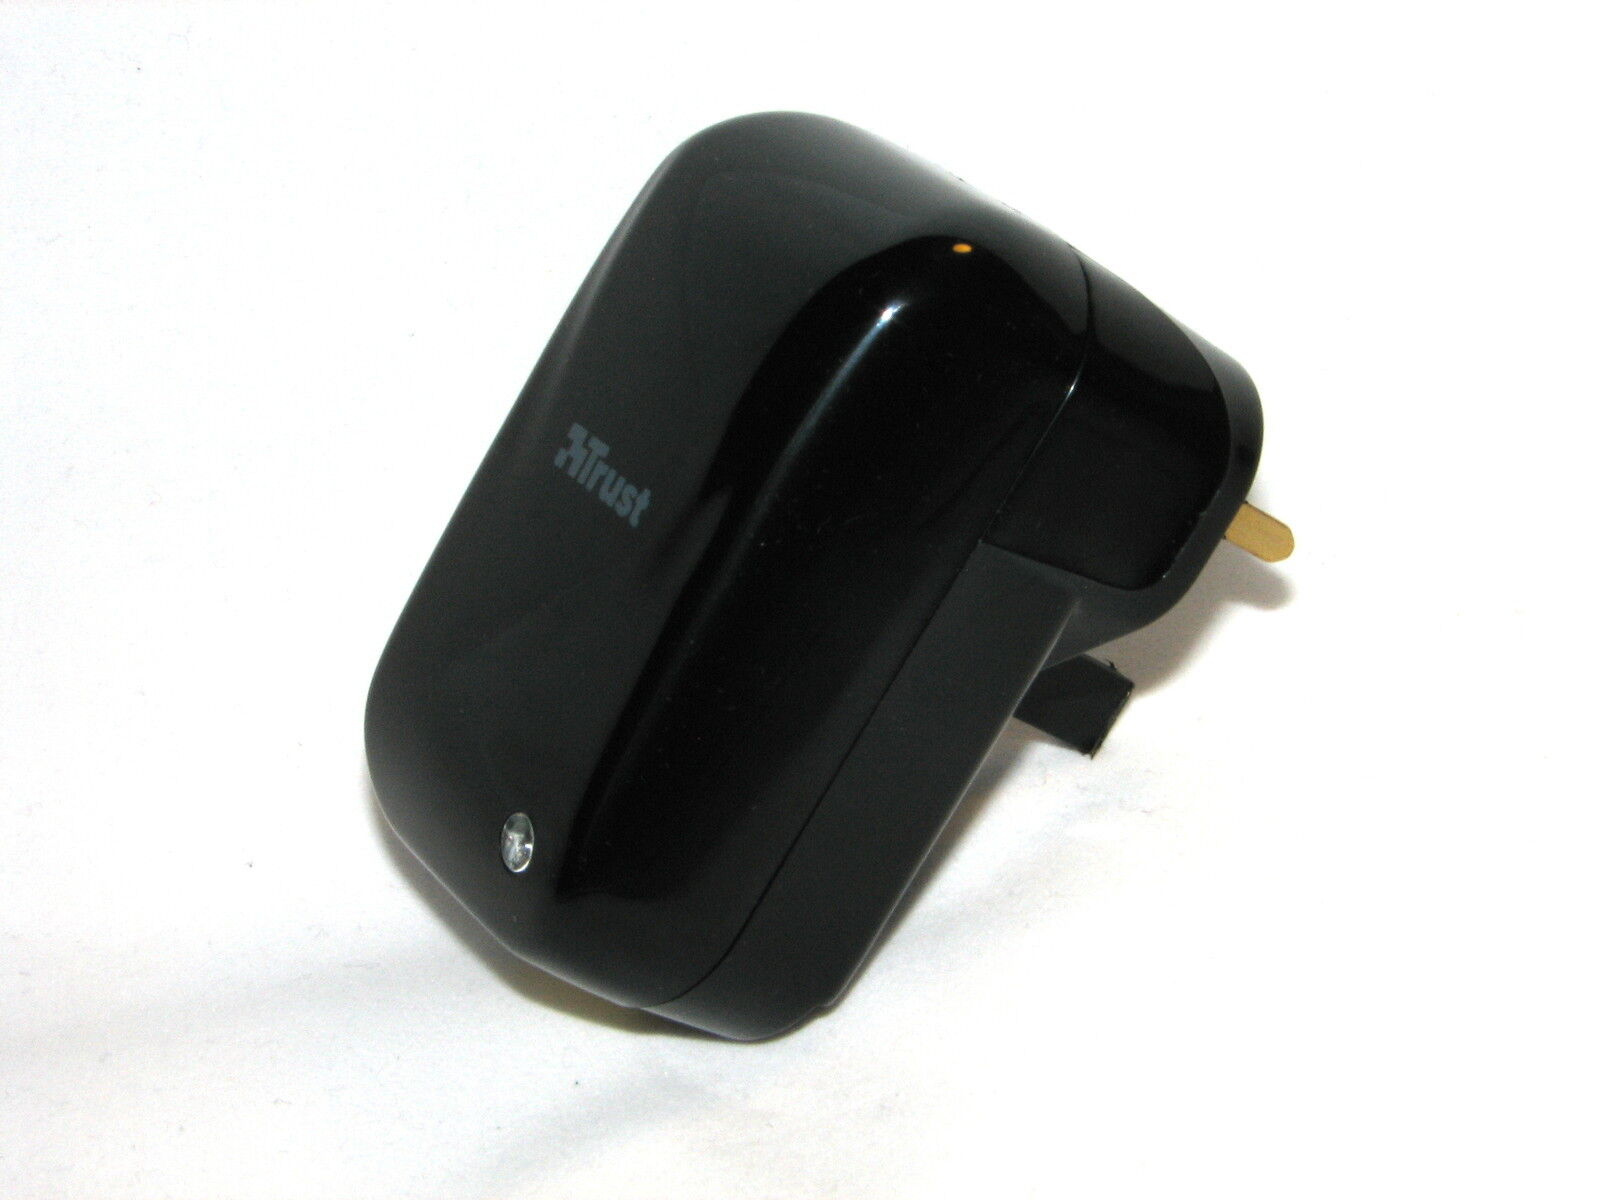 TRUST UK PLUG MAINS TO USB CHARGER 100-240V, OUTPUT 5V AT 2.1 AMPS, 10.5 WATTS